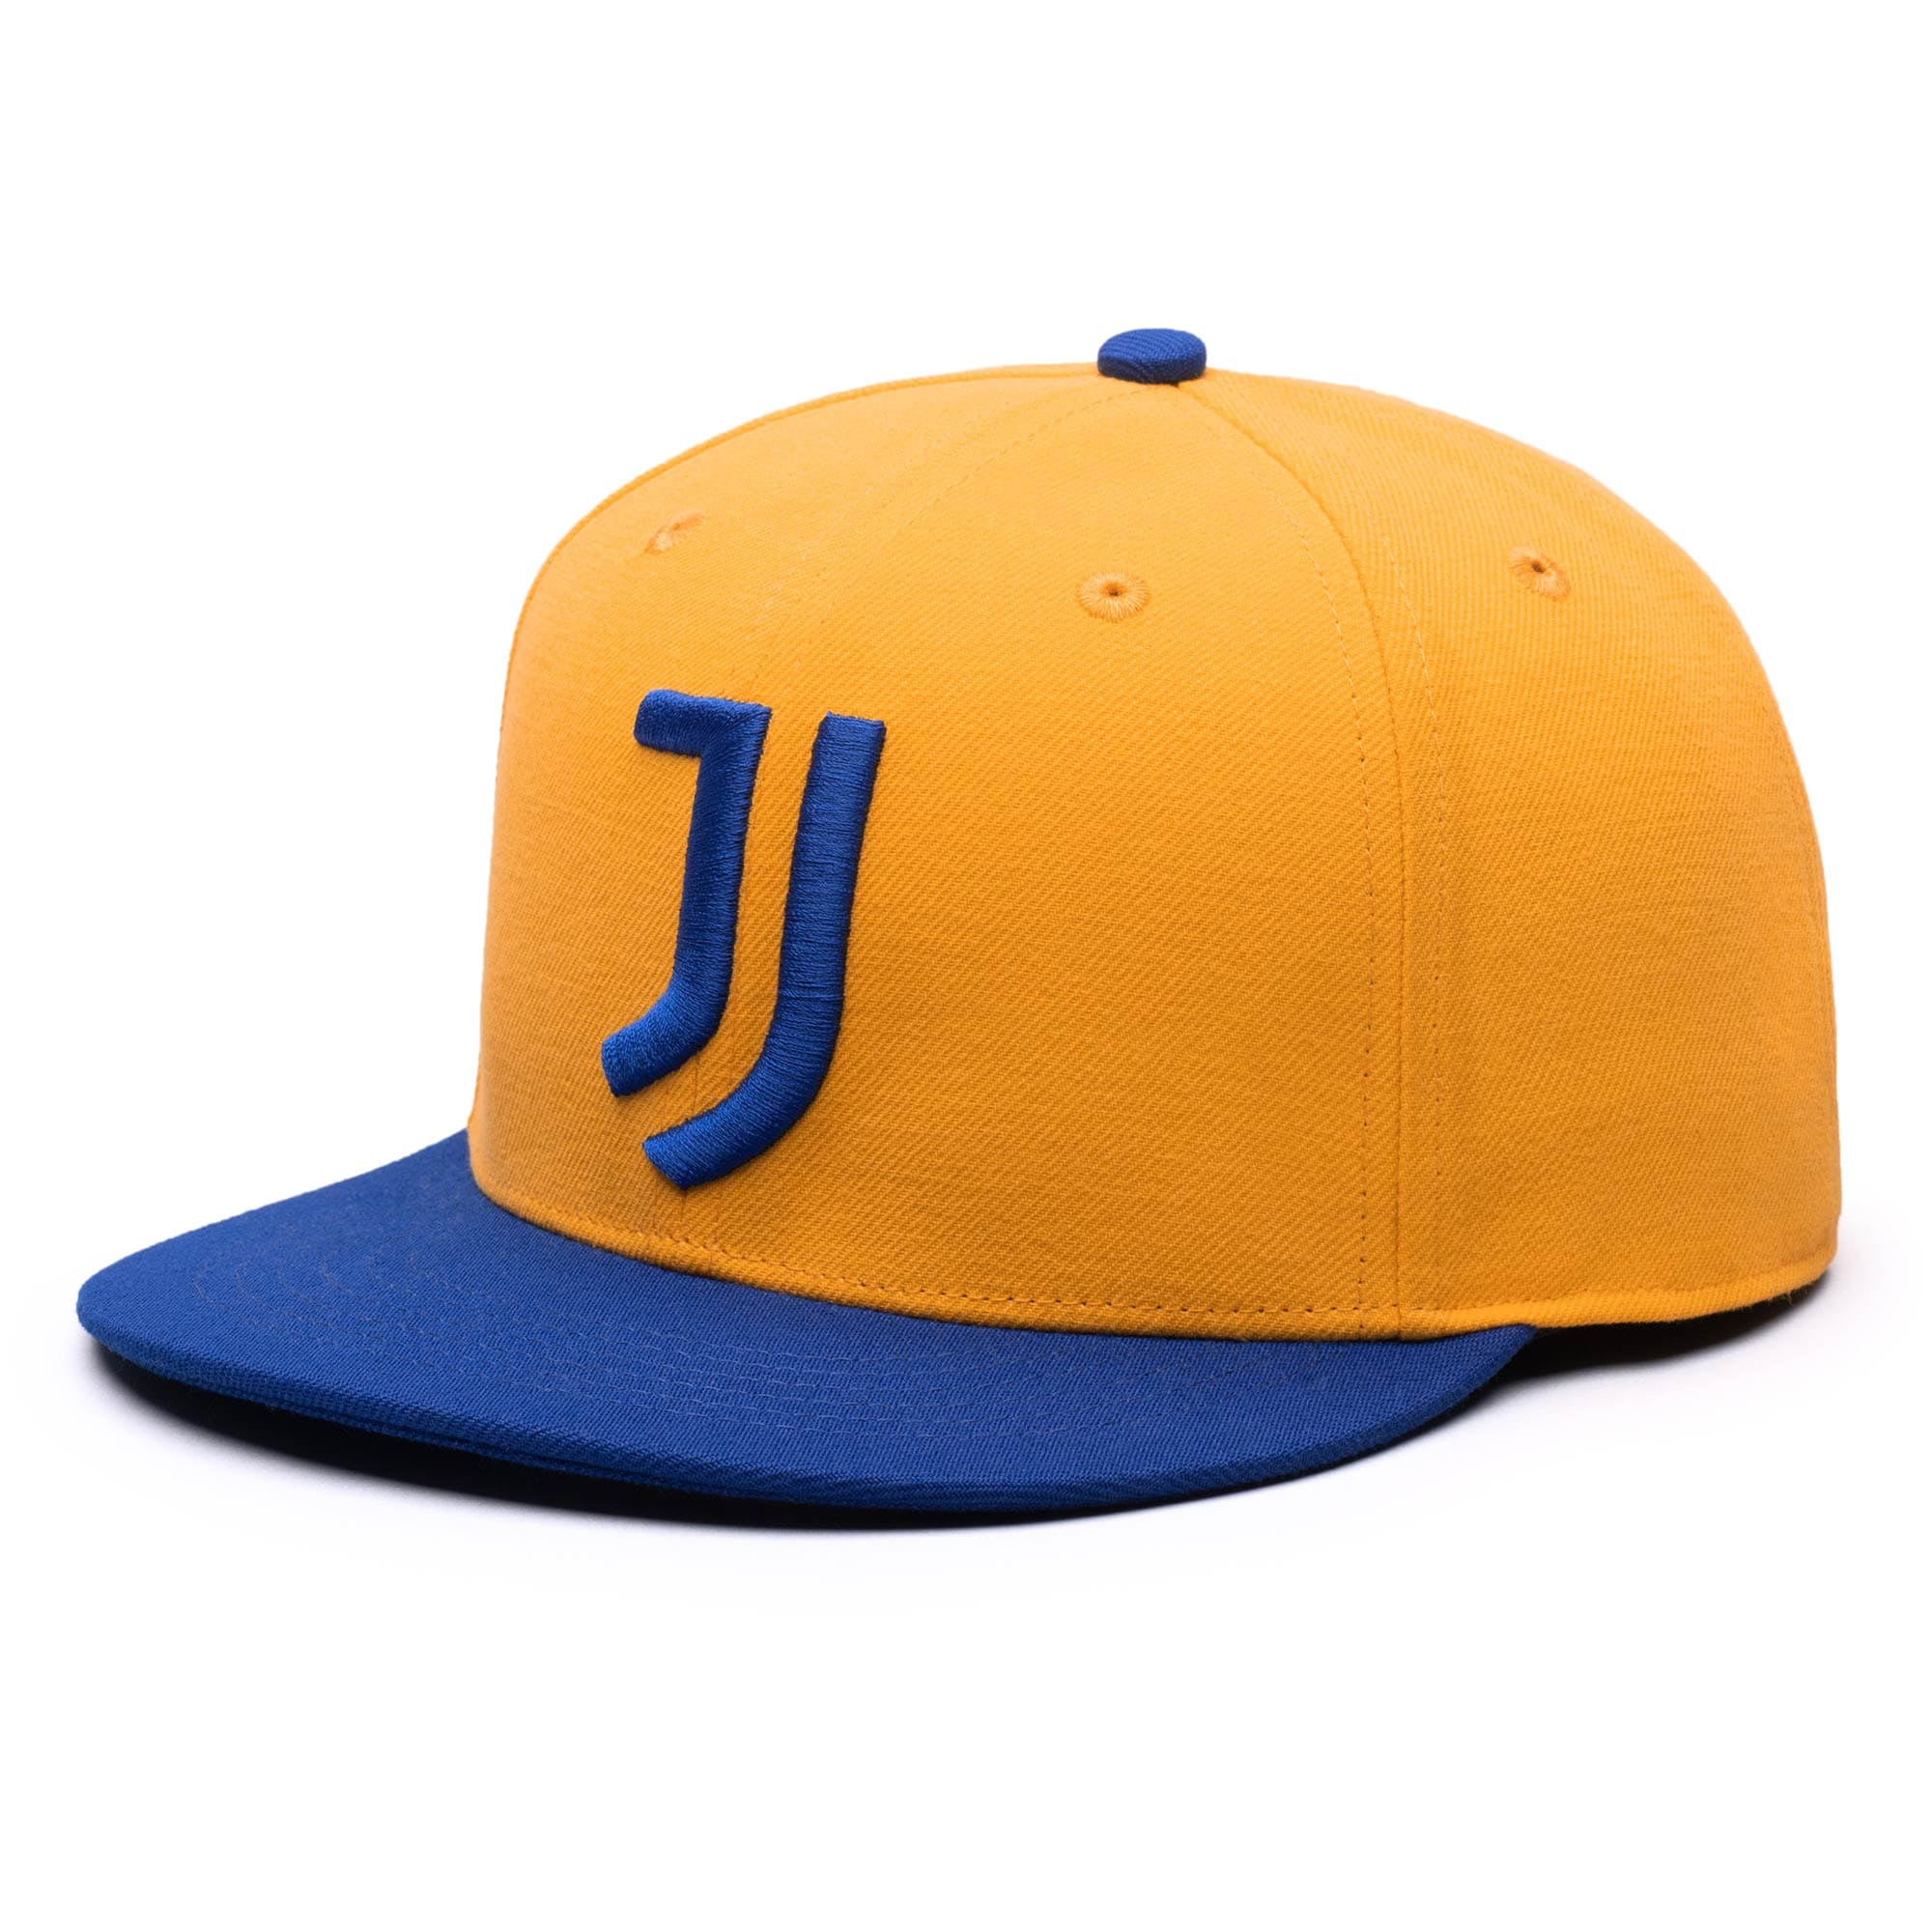 Juventus Official Licensed Soccer Cap FI Collection 03 